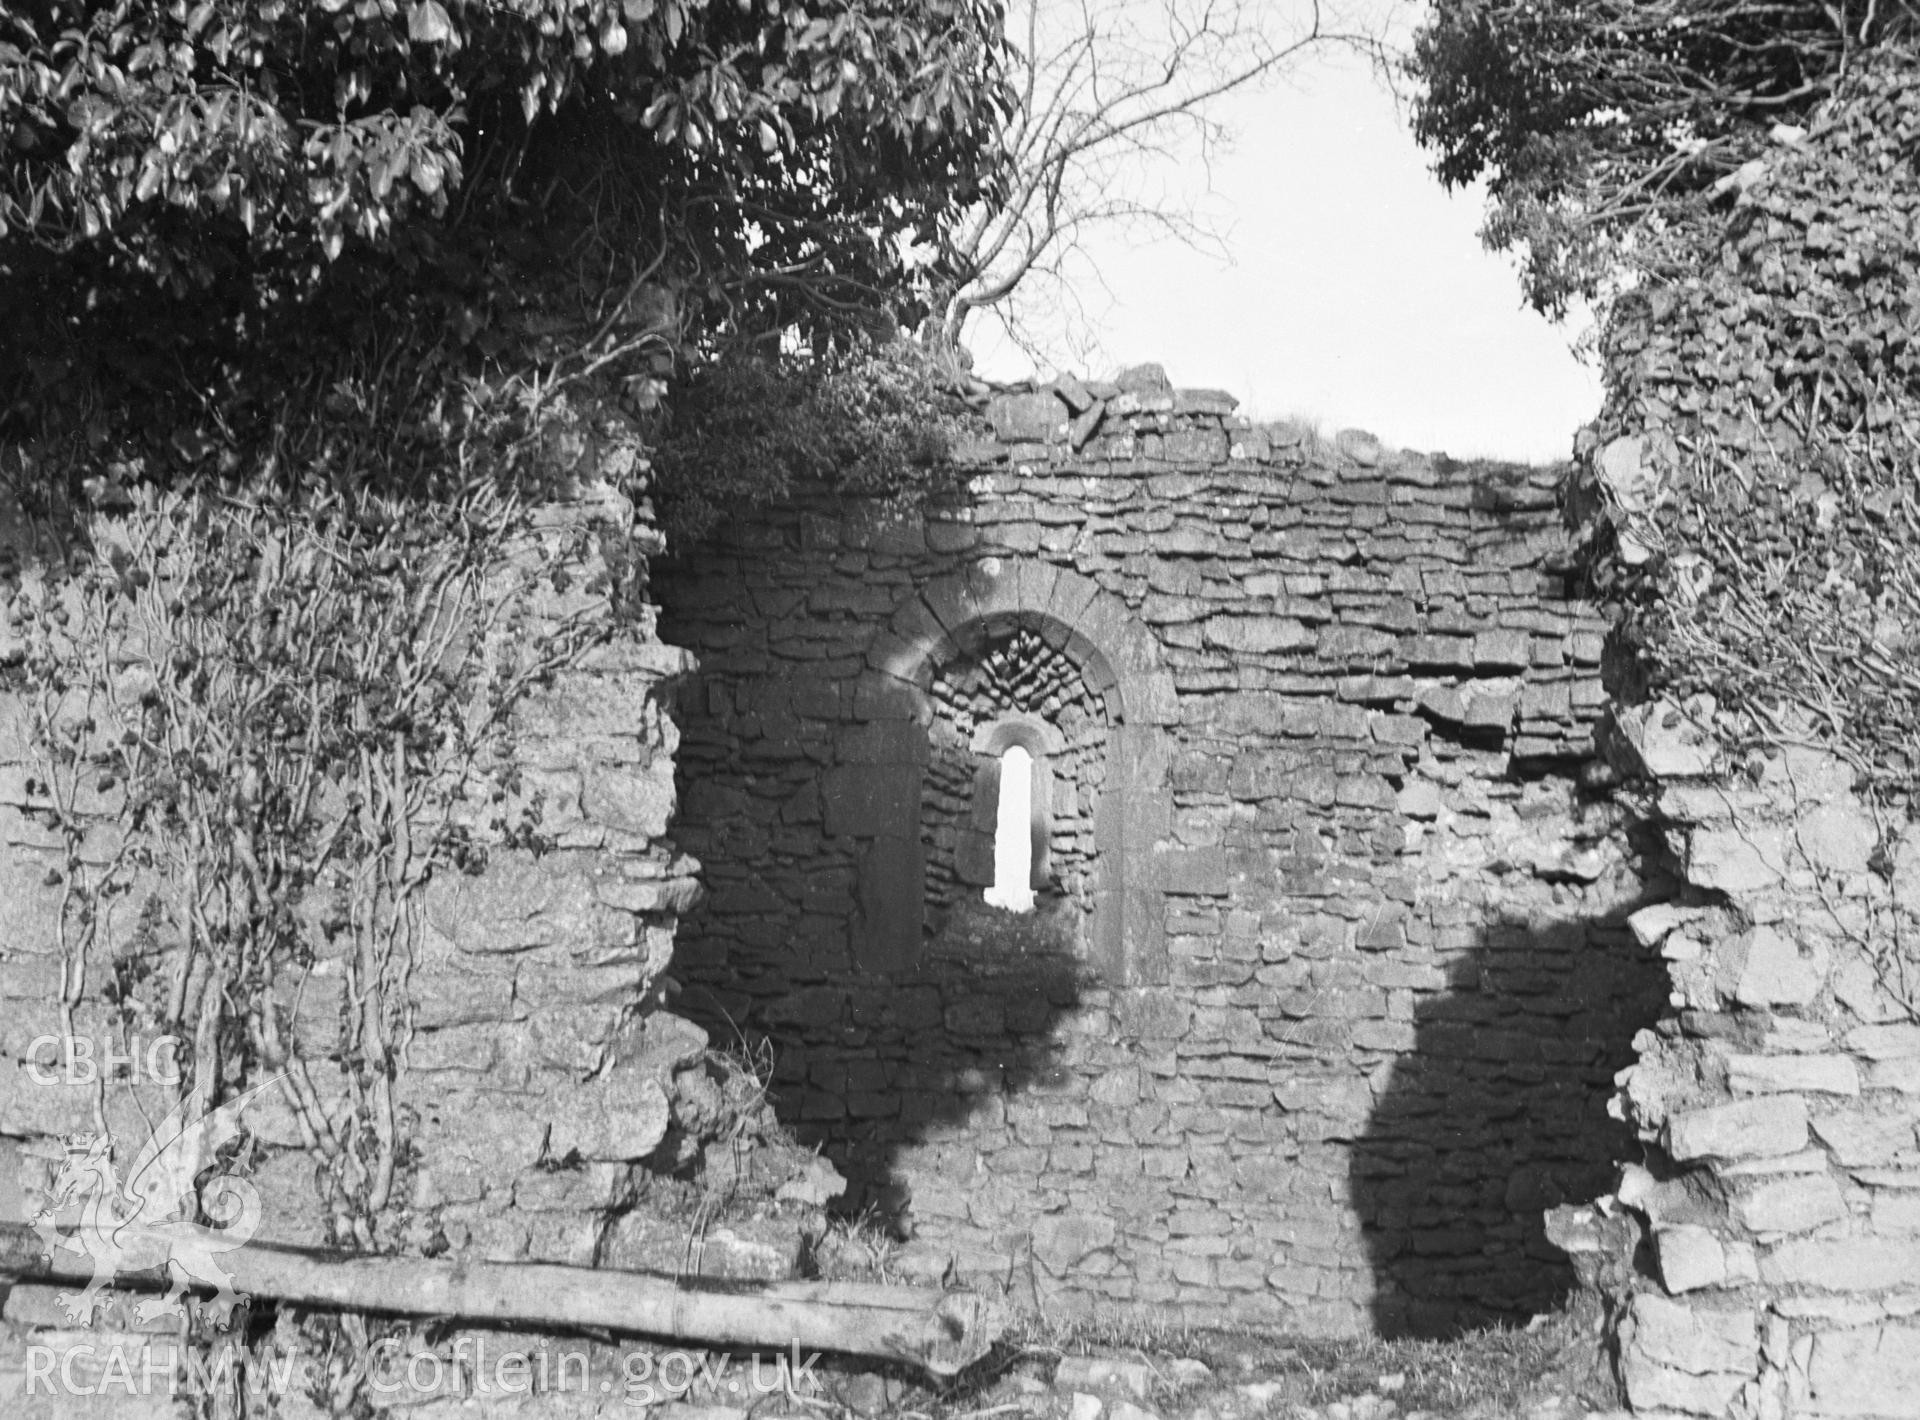 Digital copy of a nitrate negative showing Runston Chapel, taken through opening from south side, dated 1947.